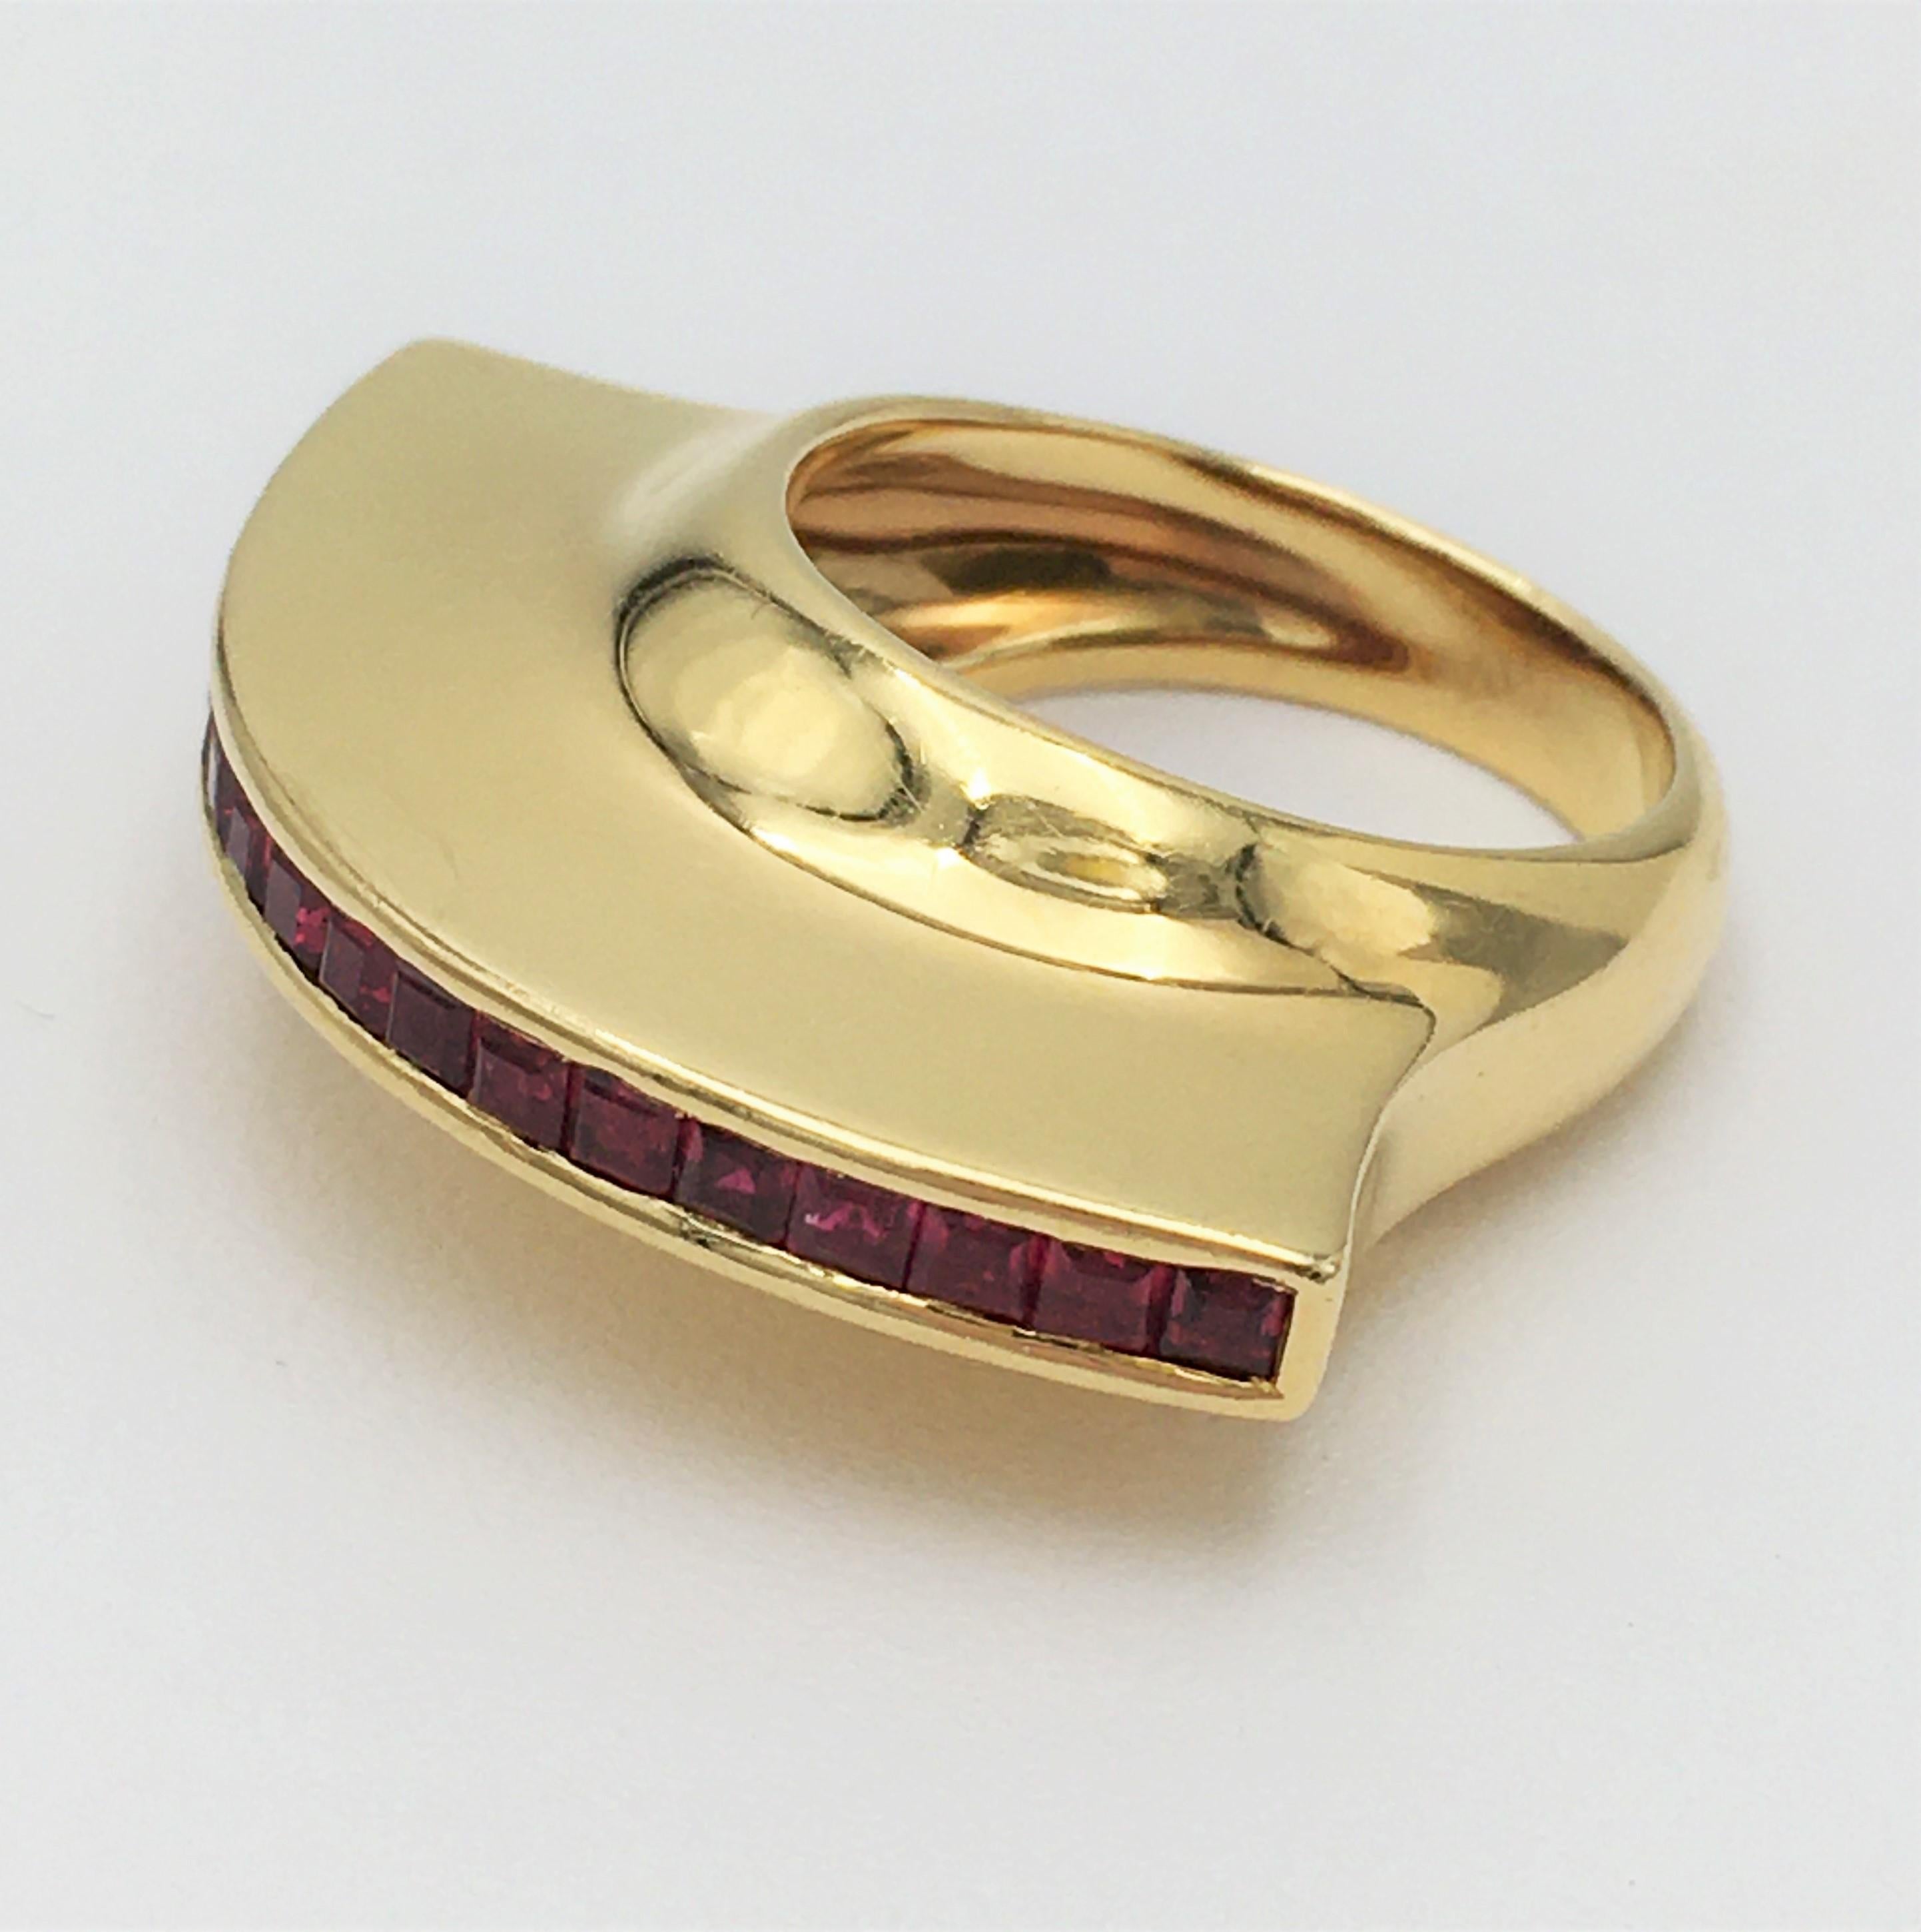 Authentic vintage Paloma Picasso for Tiffany & Co. fan ring crafted in 18 karat yellow gold and set with an estimated carats of calibre cut rubies weighing an estimated 0.95 carats. Signed Tiffany & Co, Paloma Picasso, 18K, 1980. Ring size 6. Not